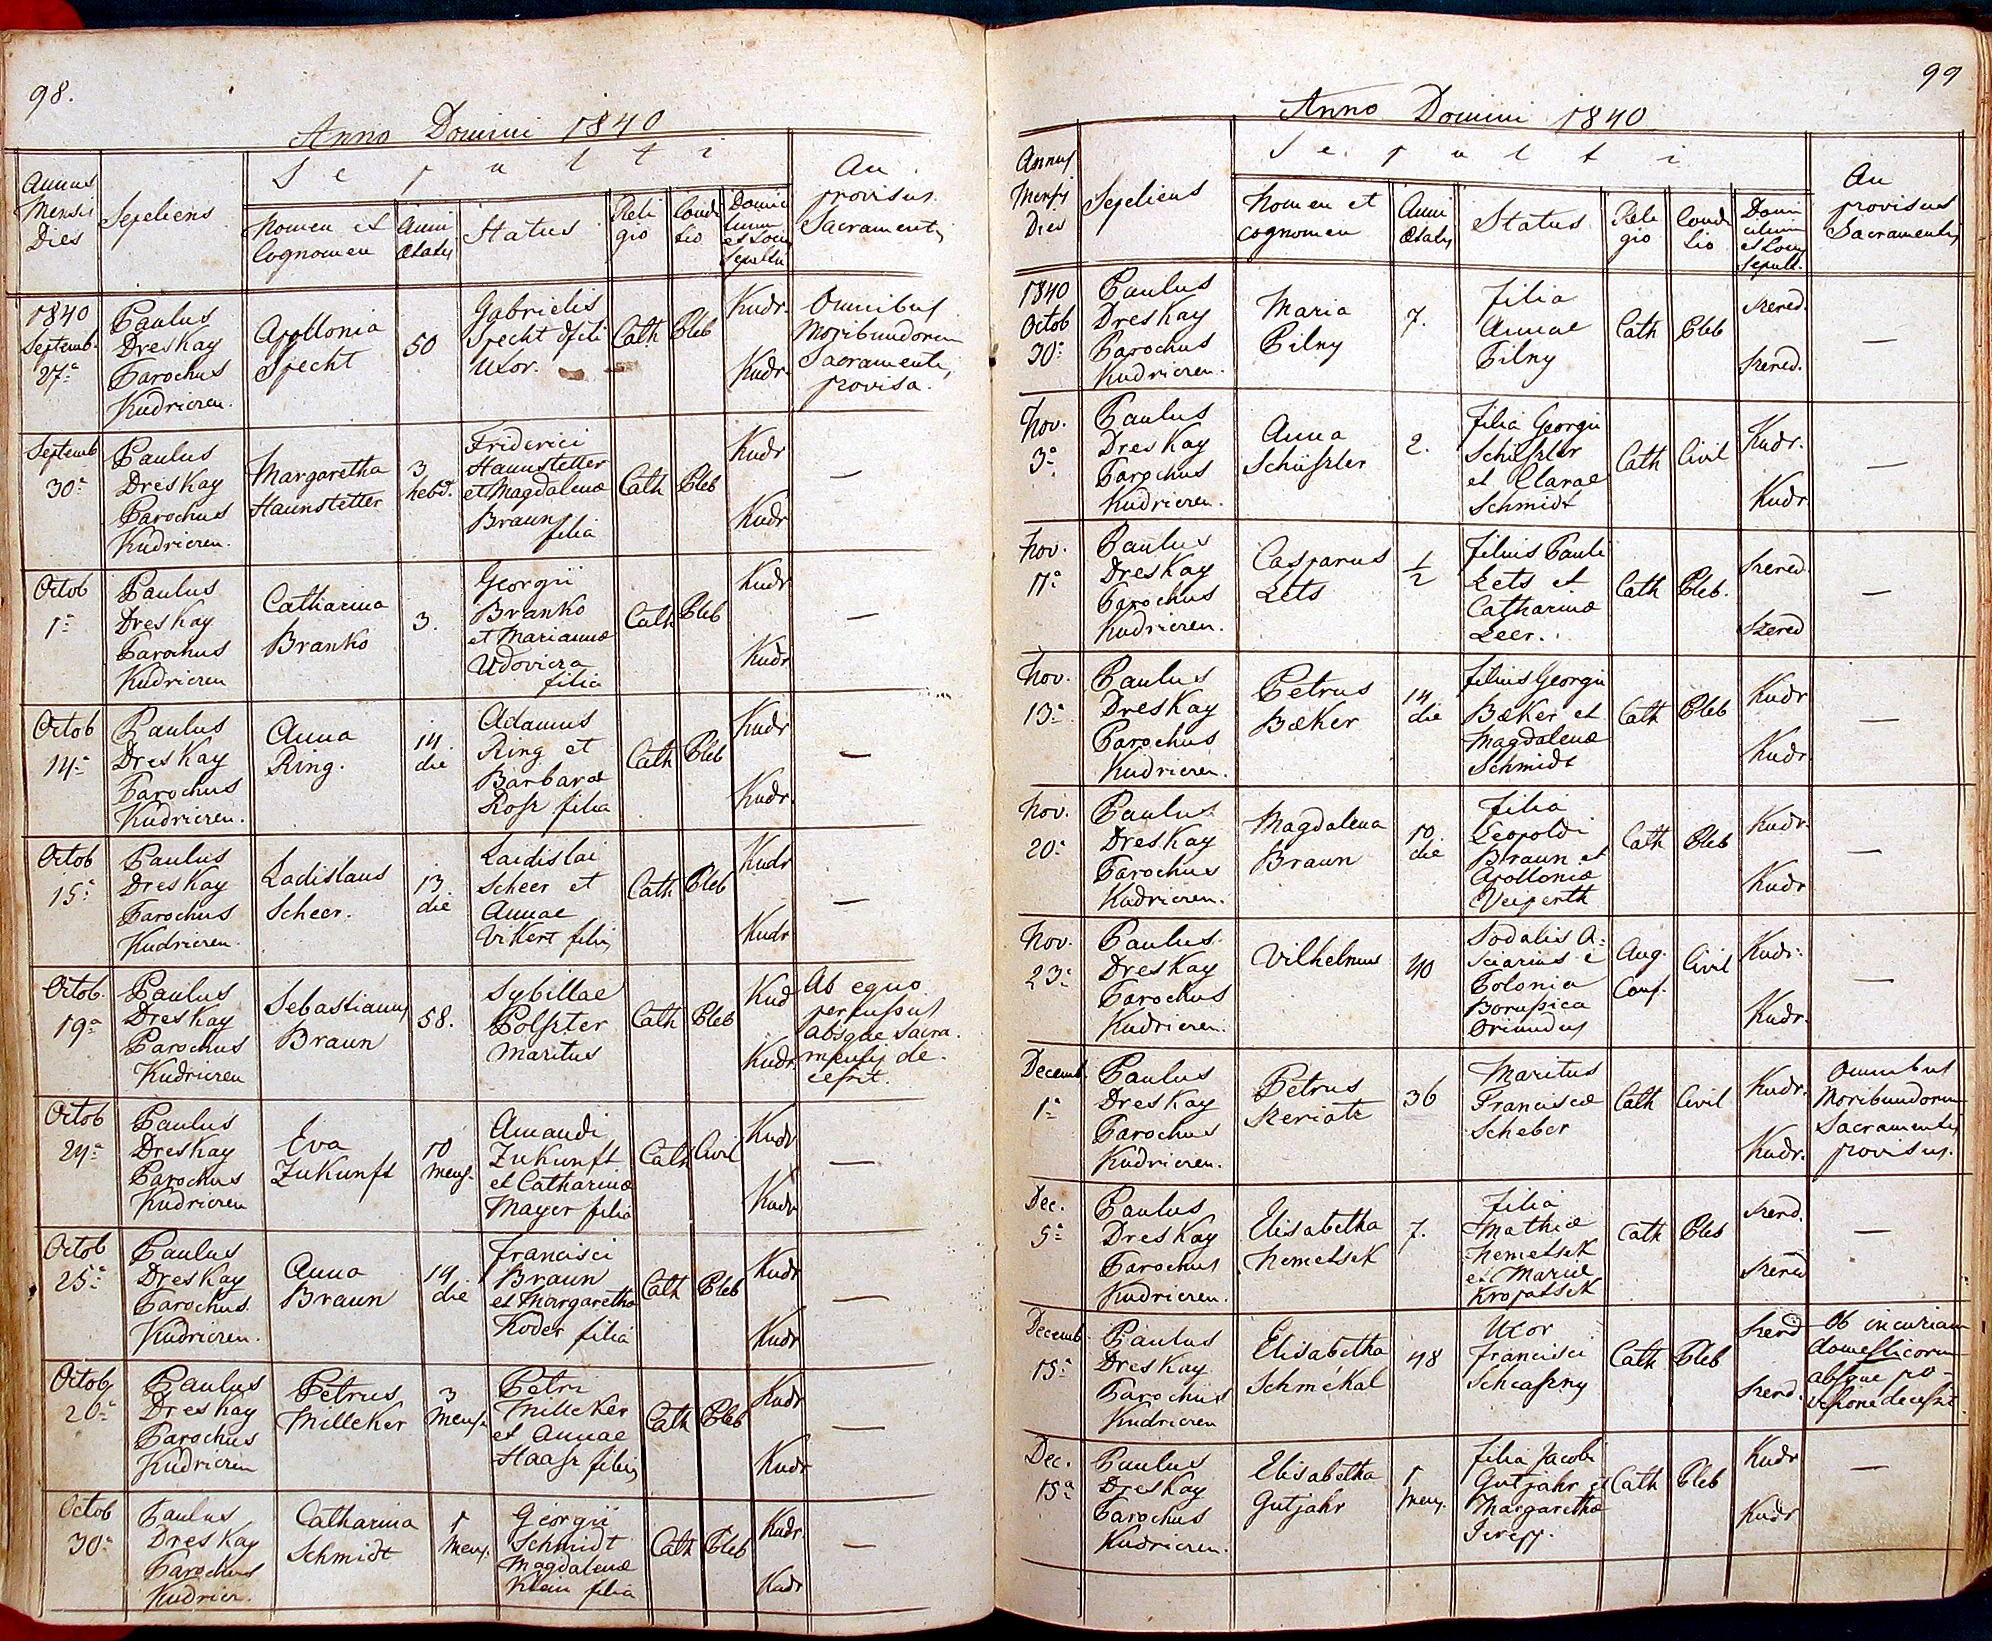 images/church_records/DEATHS/1775-1828D/098 i 099